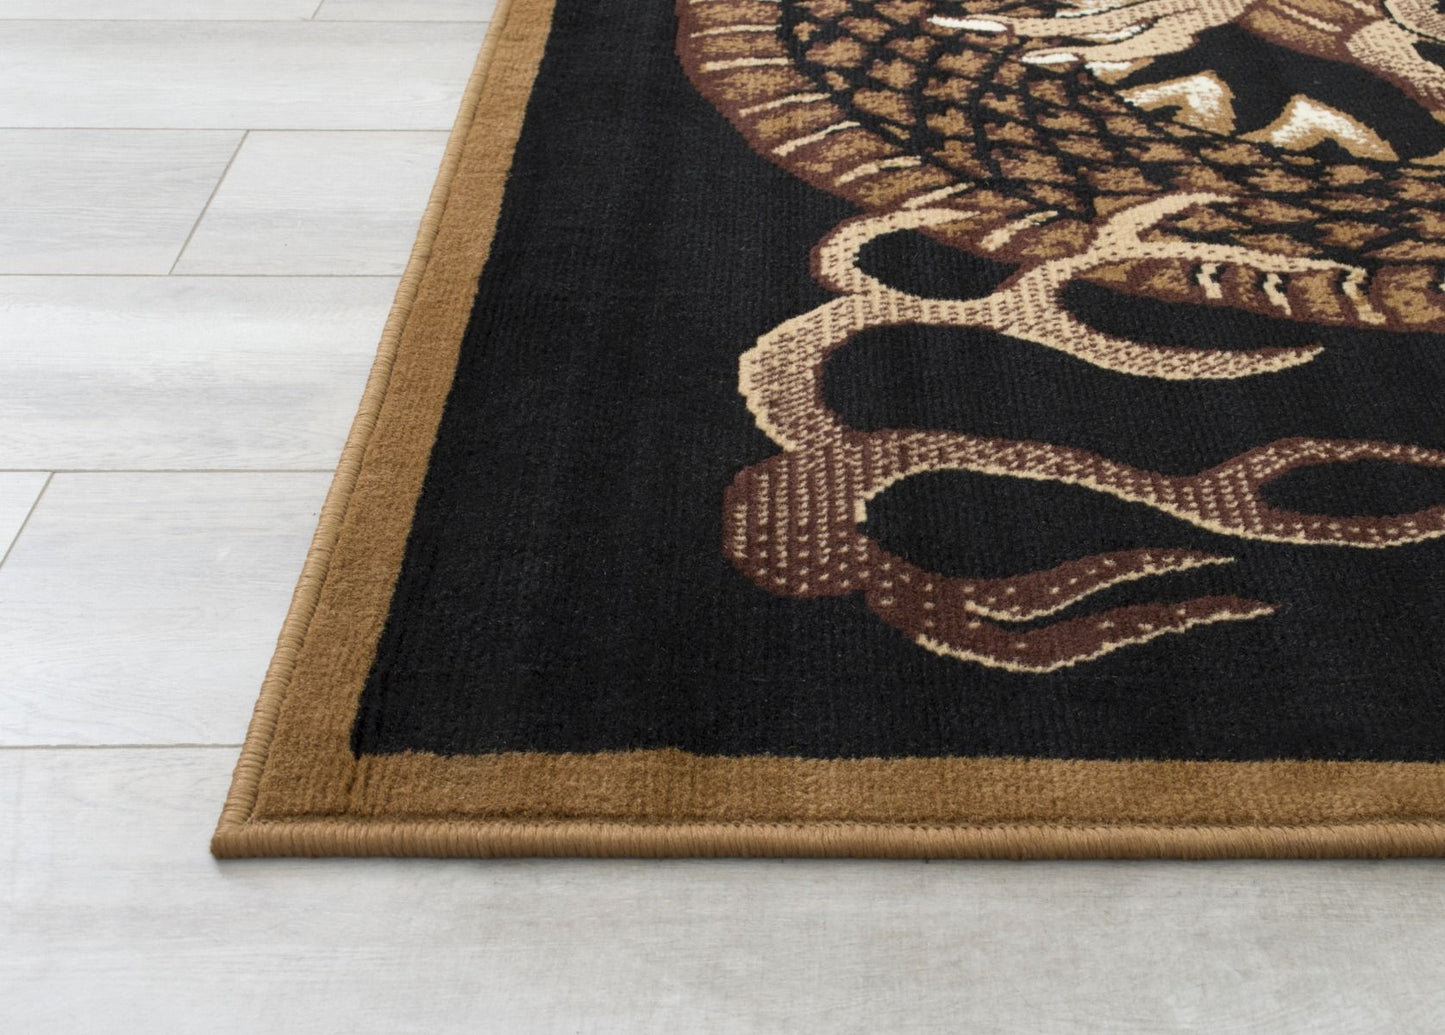 The Great Dragon Rug